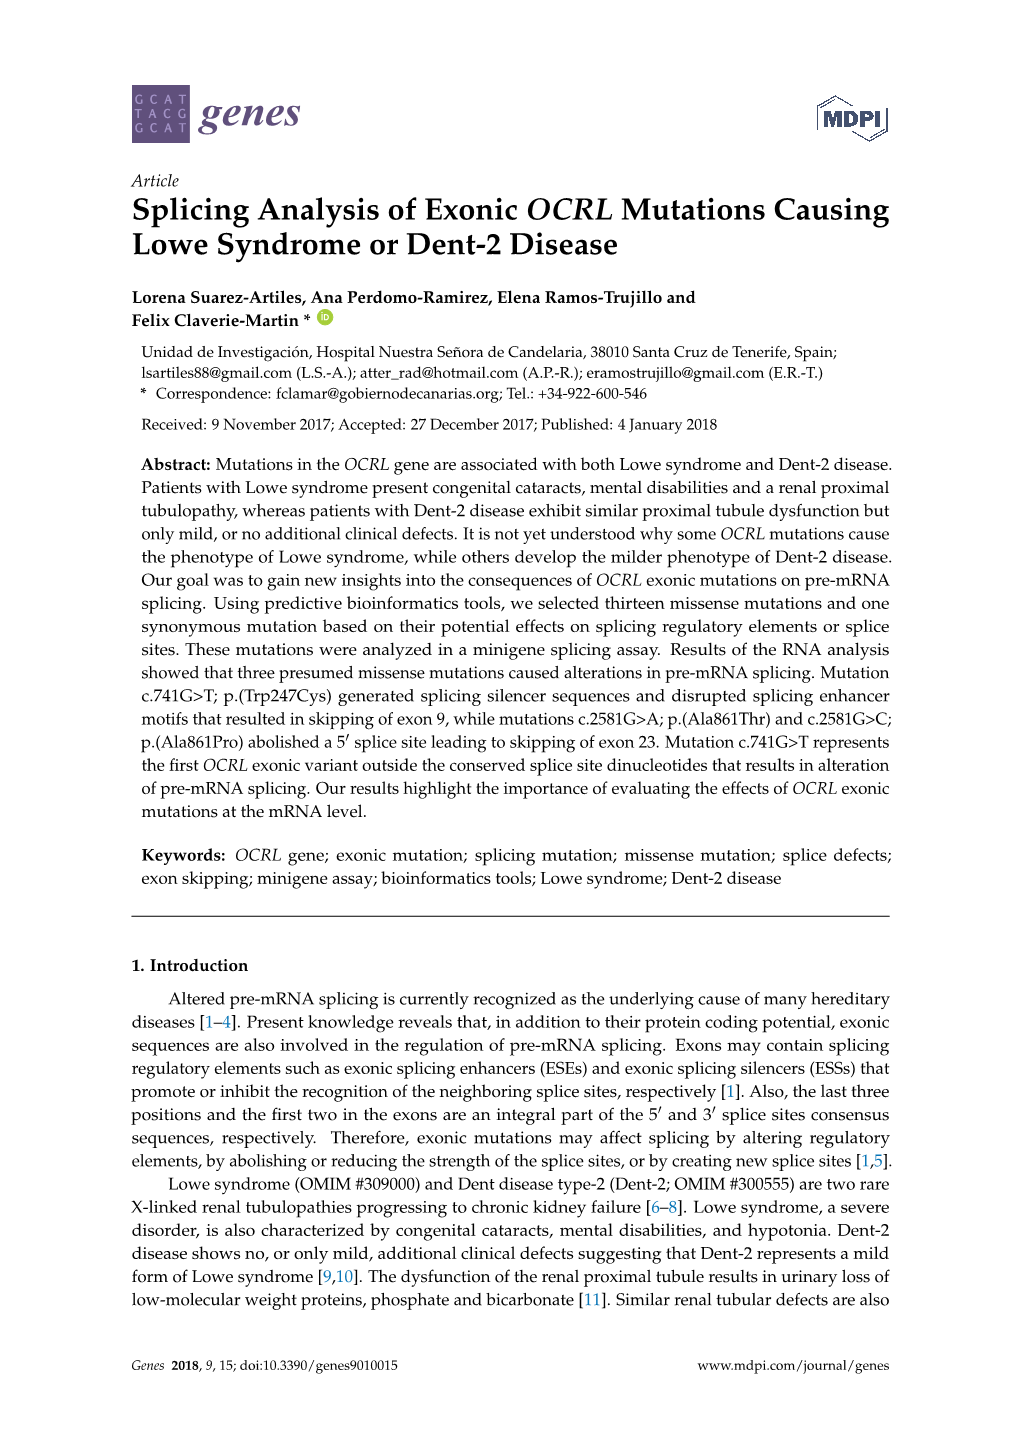 Splicing Analysis of Exonic OCRL Mutations Causing Lowe Syndrome Or Dent-2 Disease